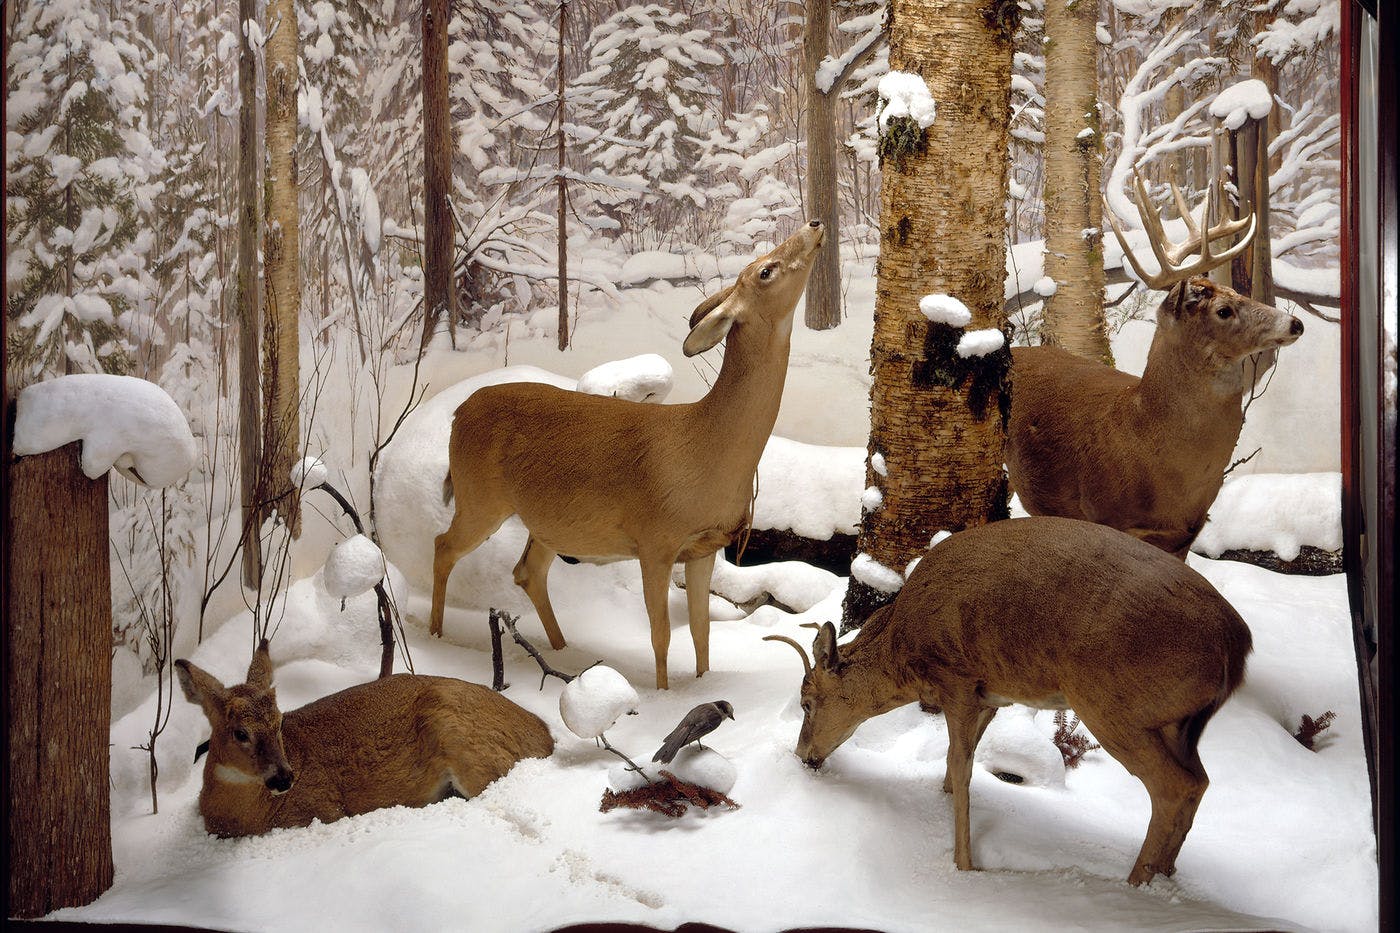 Peer into a winter forest without worrying about the cold—just one of the scenes in The Four Seasons of the White-tailed Deer dioramas by Carl Akeley.